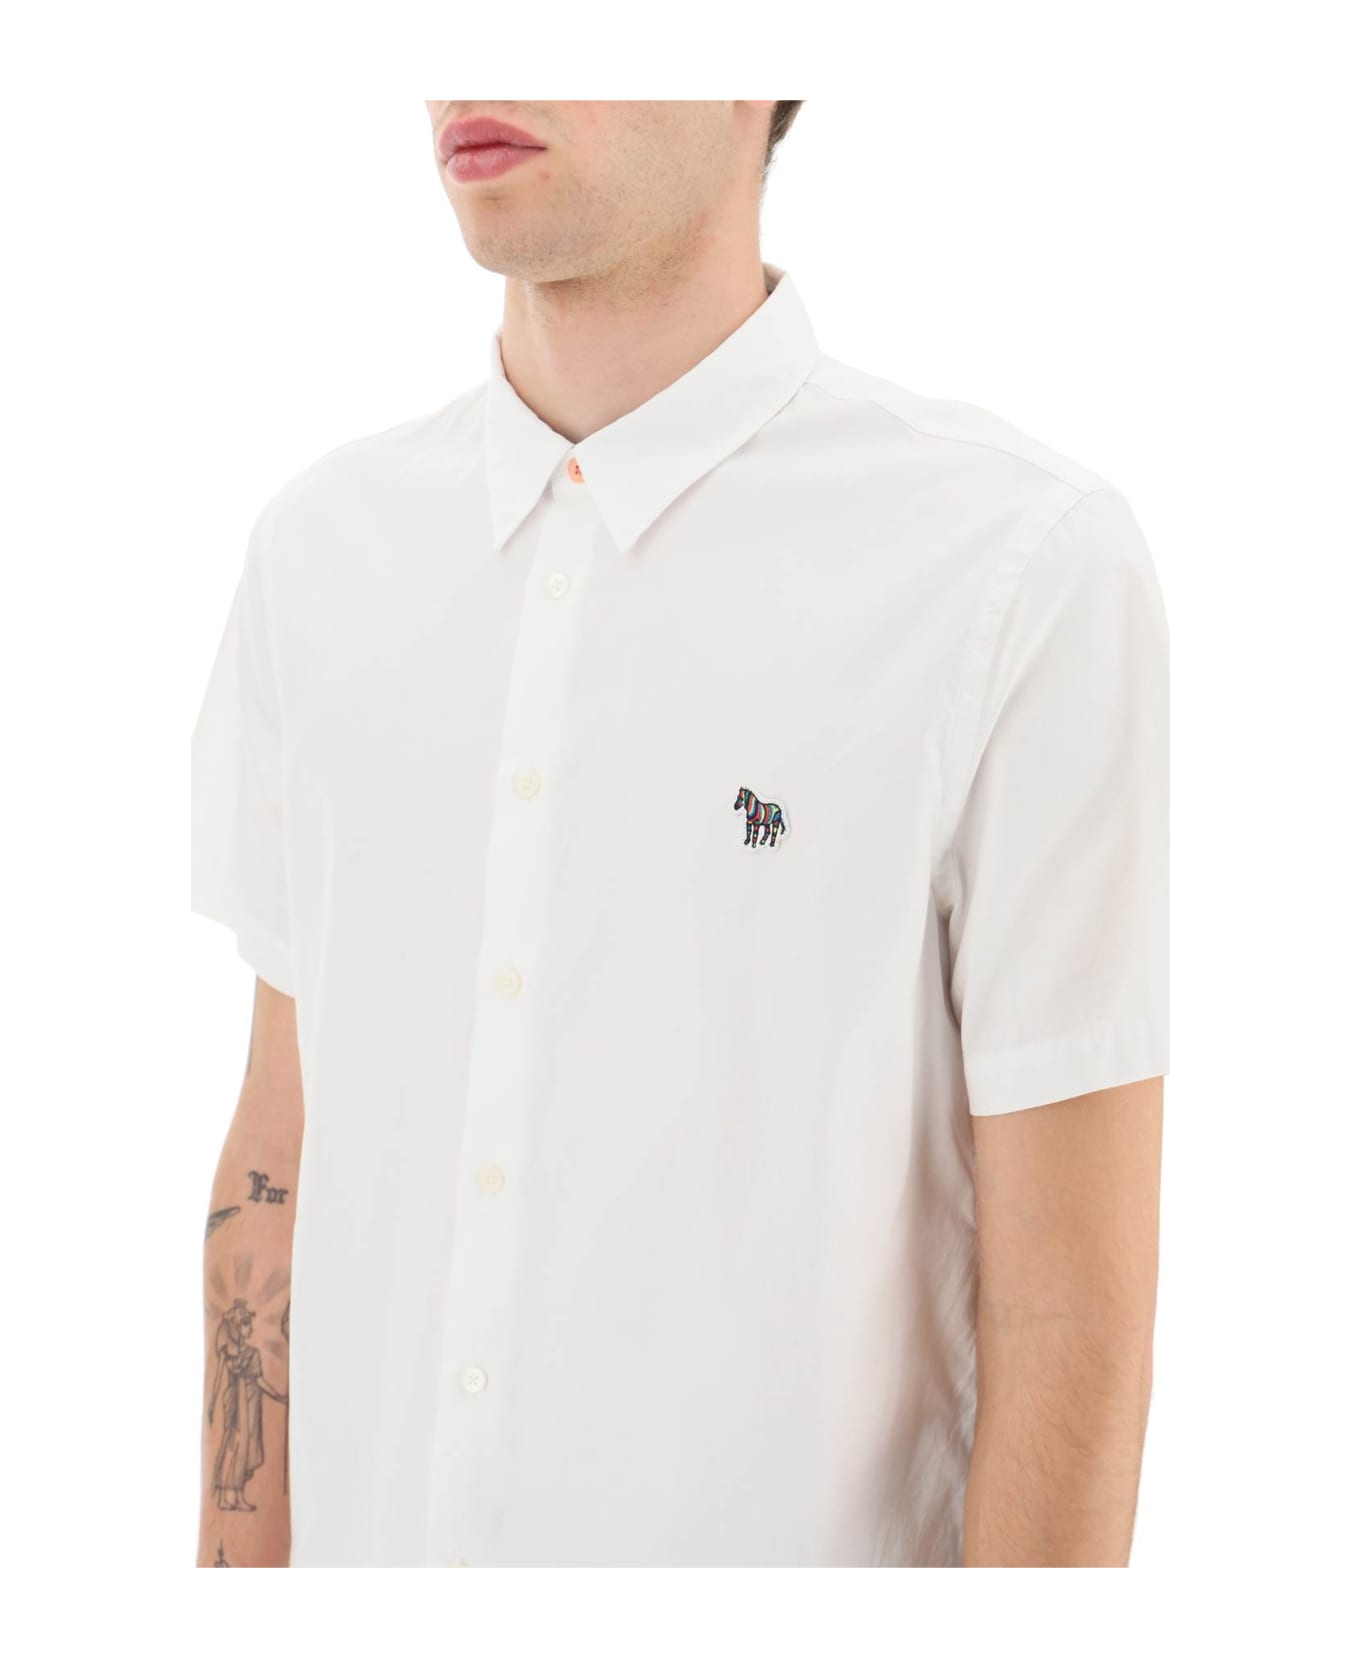 PS by Paul Smith Zebra Patch Shirt - WHITE (White) シャツ